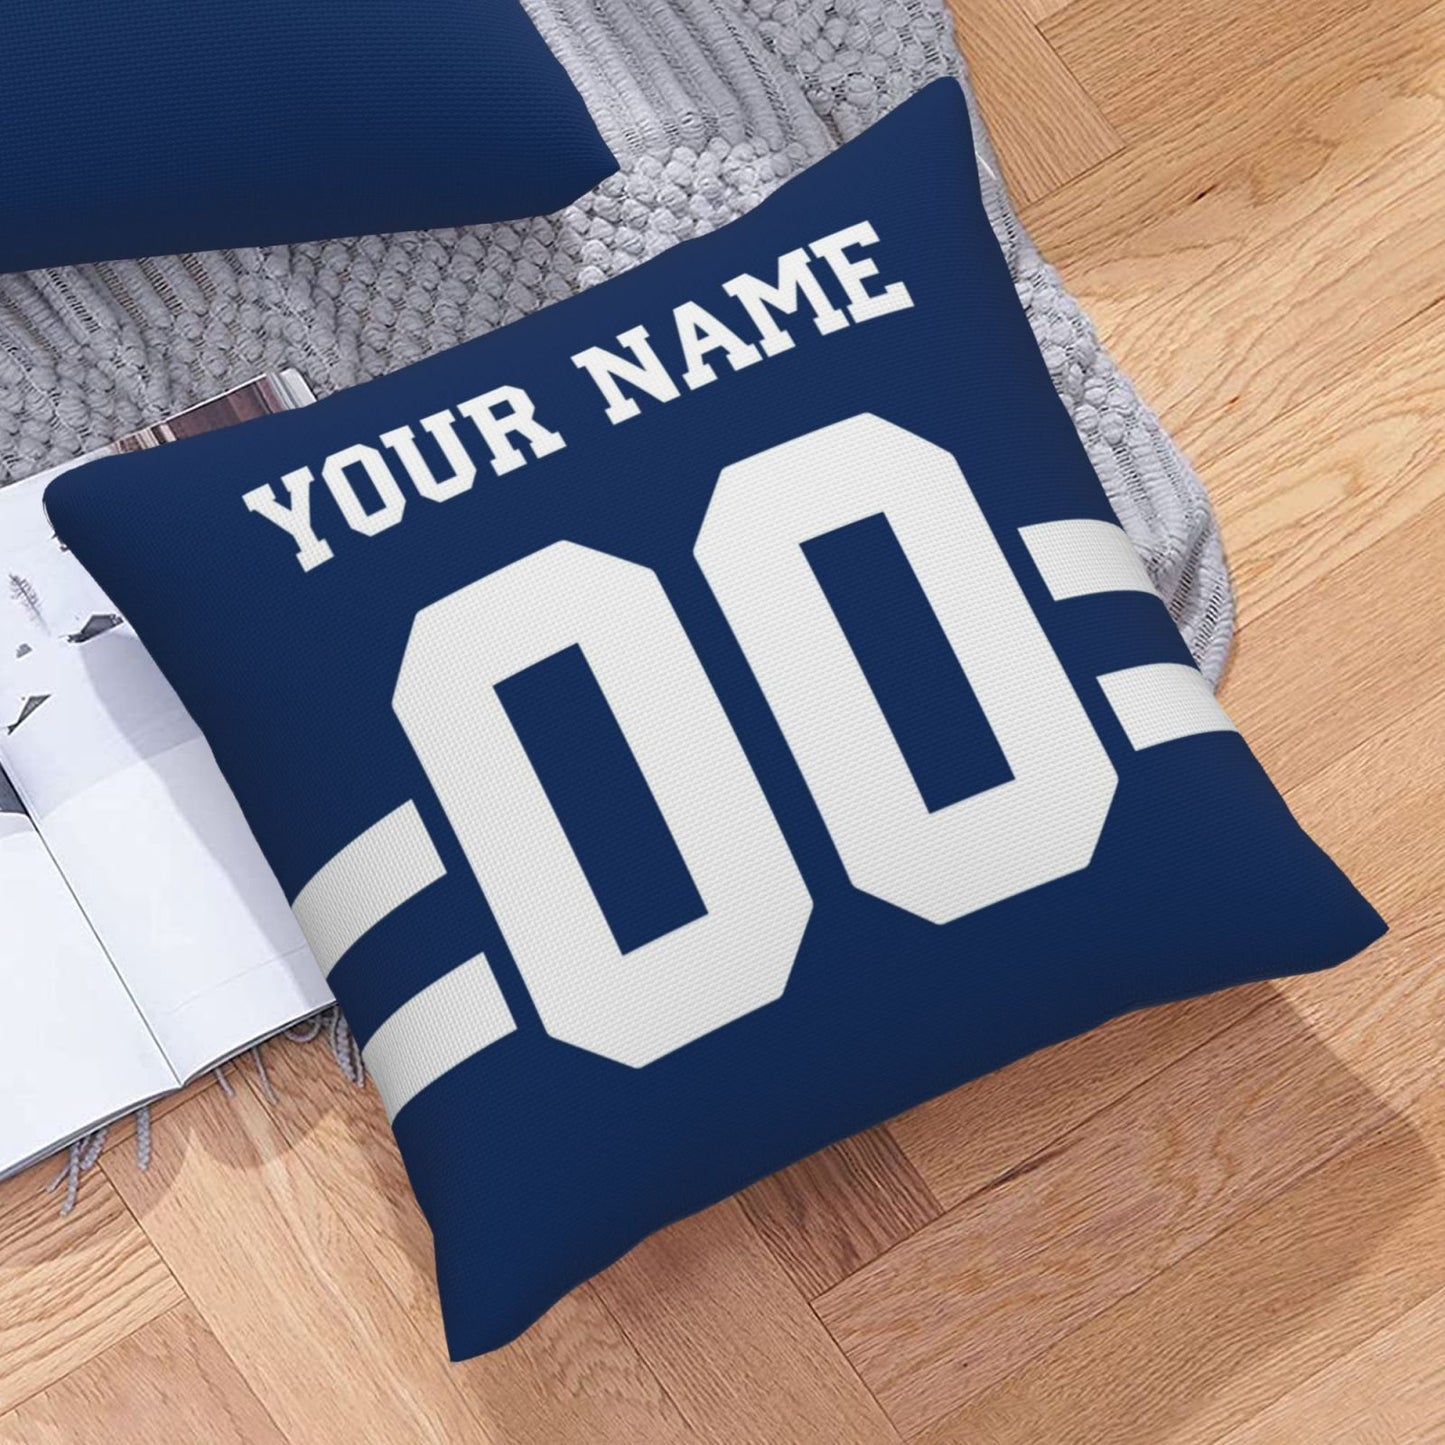 Customized Indianapolis Colts Football Team Decorative Throw Pillow Case Print Personalized Football Style Fans Letters & Number Royal Pillowcase Housewarming Gifts